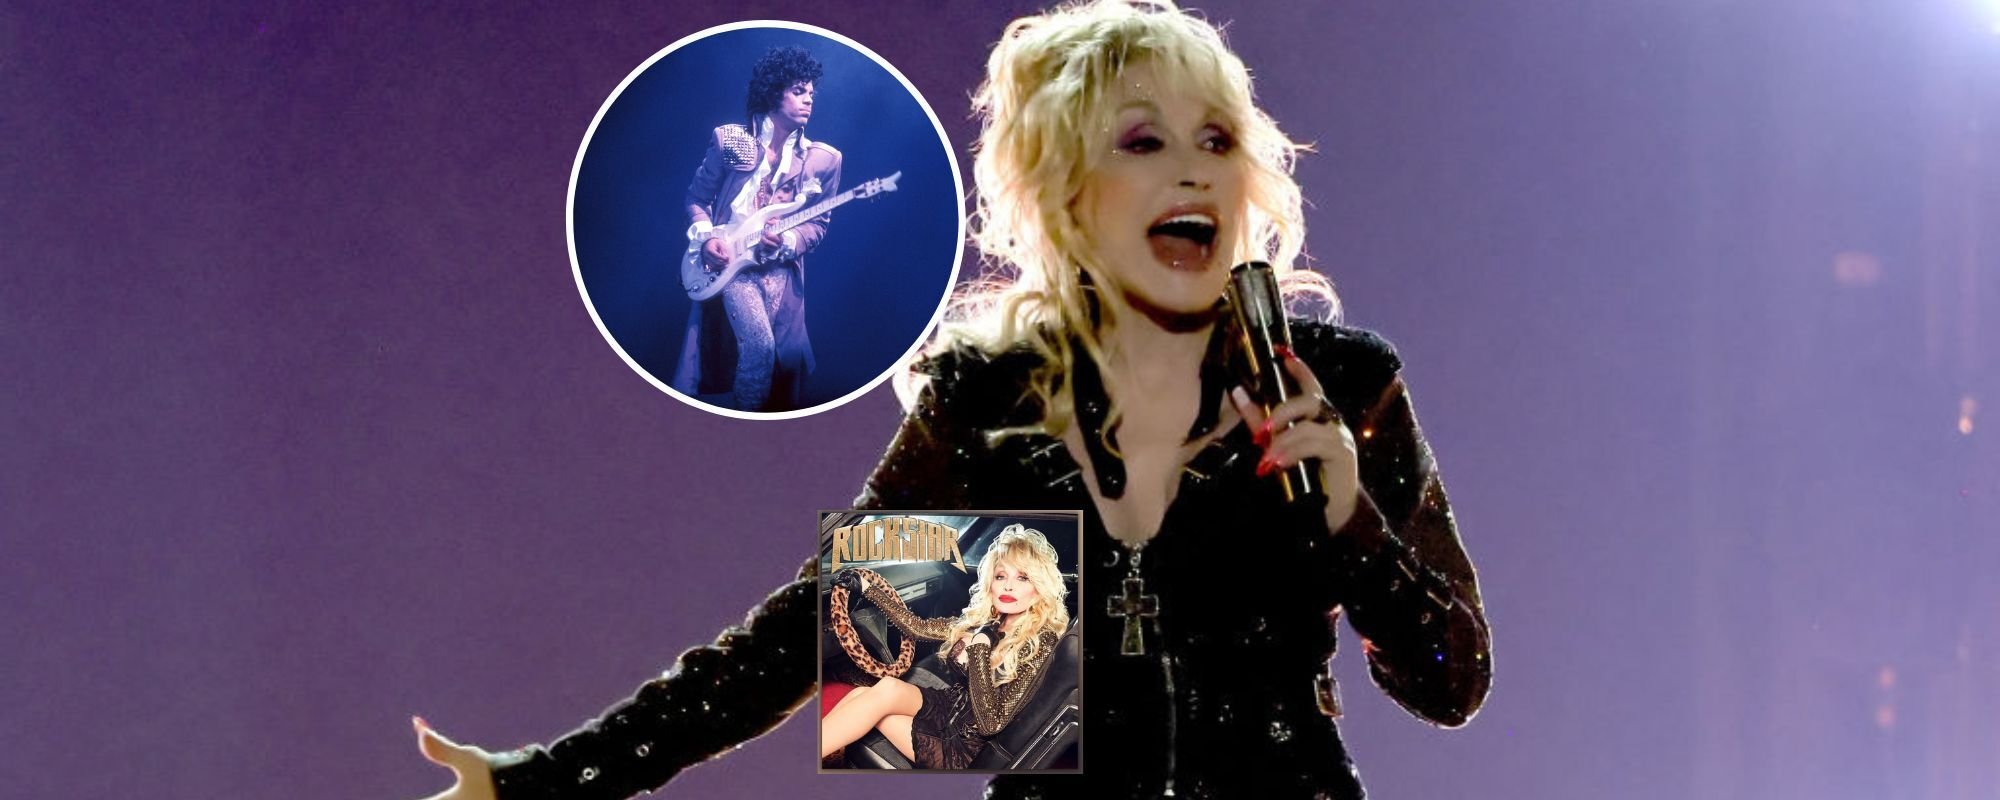 Dolly Parton Honors Prince with "Purple Rain" From New Rock Album 'Rockstar'